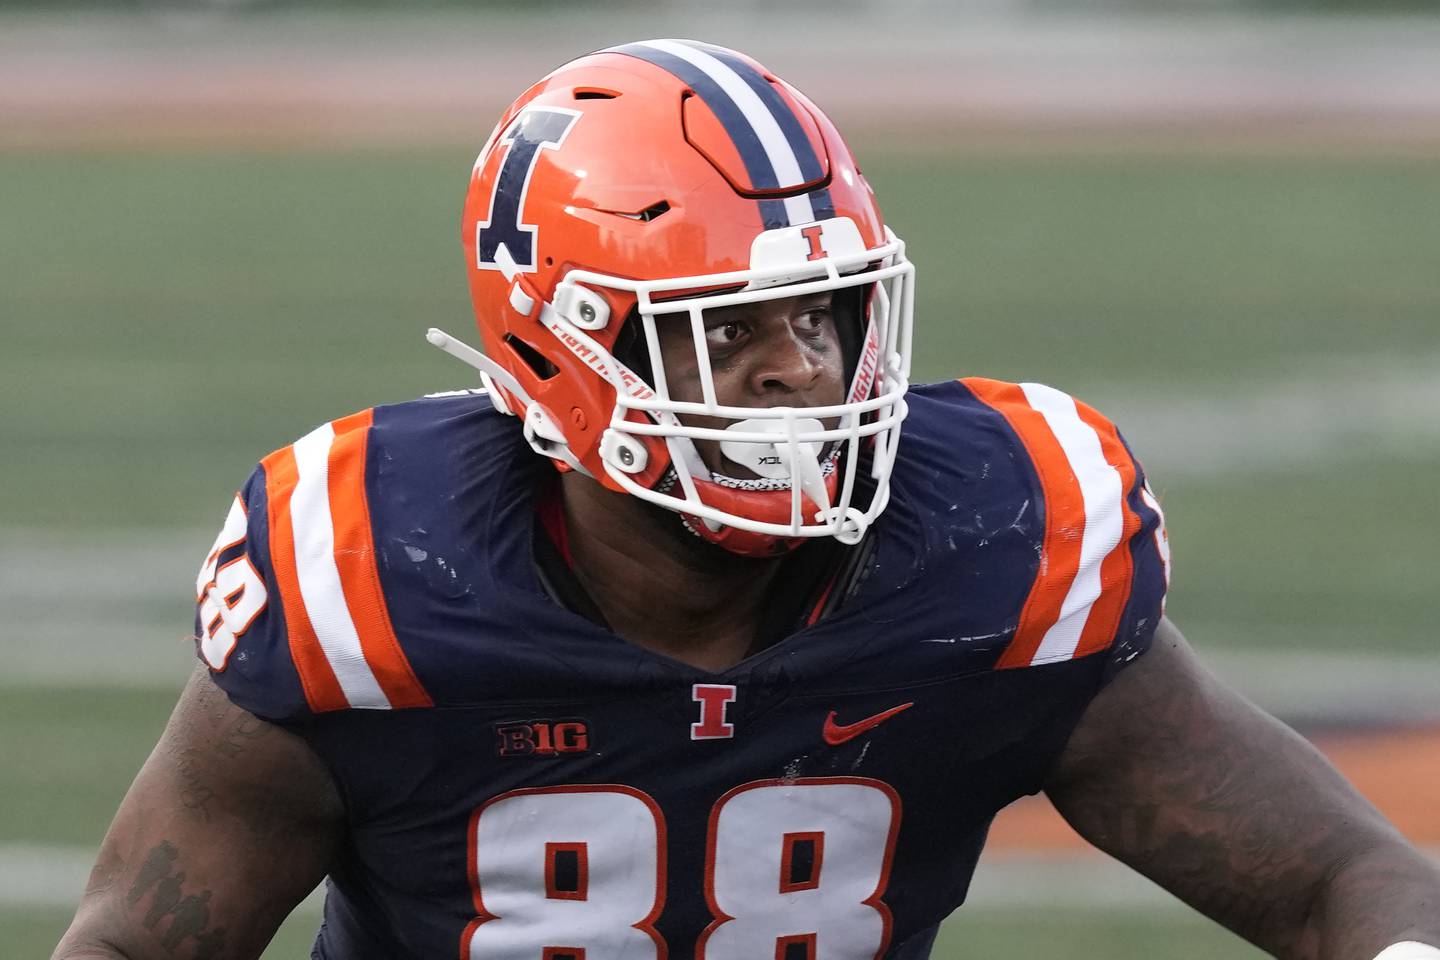 Illinois defensive lineman Keith Randolph Jr. plays around the line of scrimmage during a 2023 NCAA college football game against Florida Atlantic in Champaign, Ill.